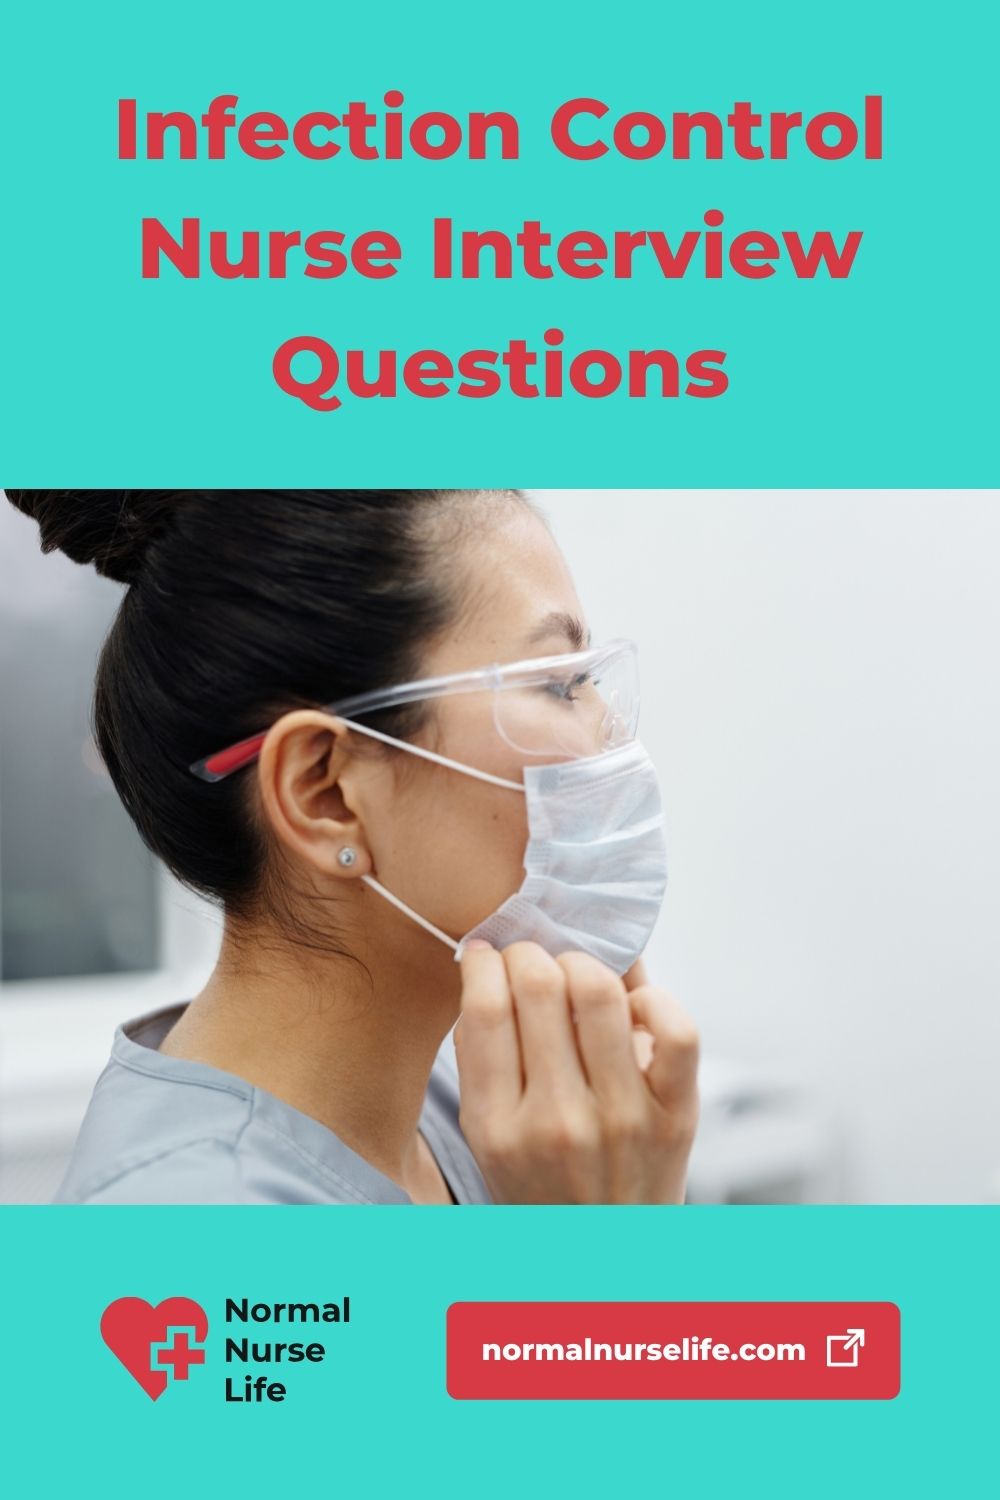 Interview questions for infection control nurses